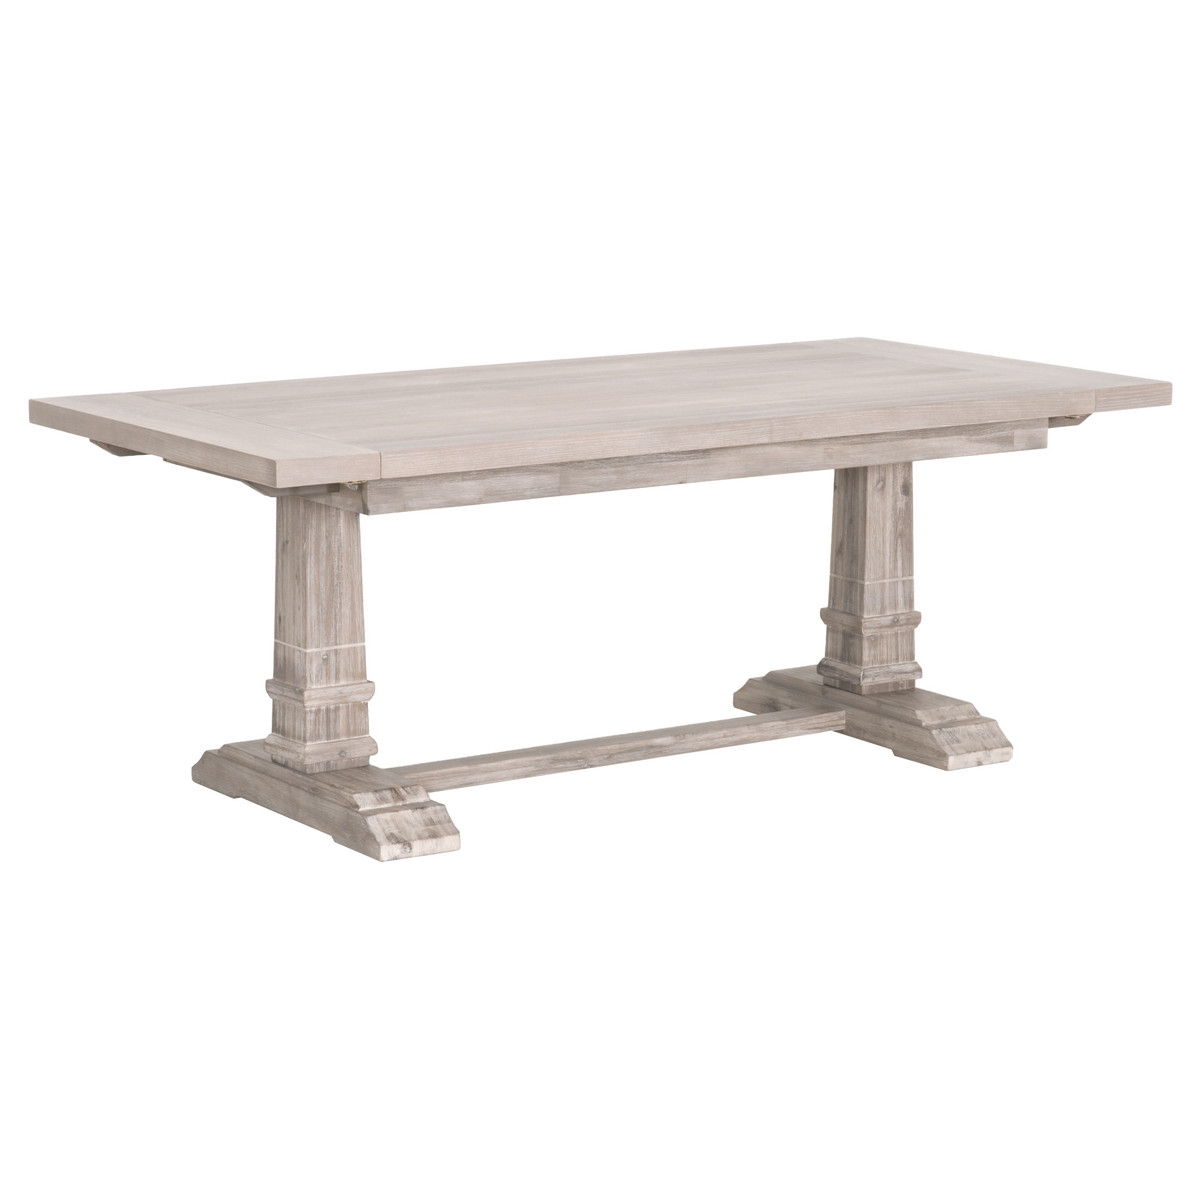 Hudson Extension Dining Table - Image 1